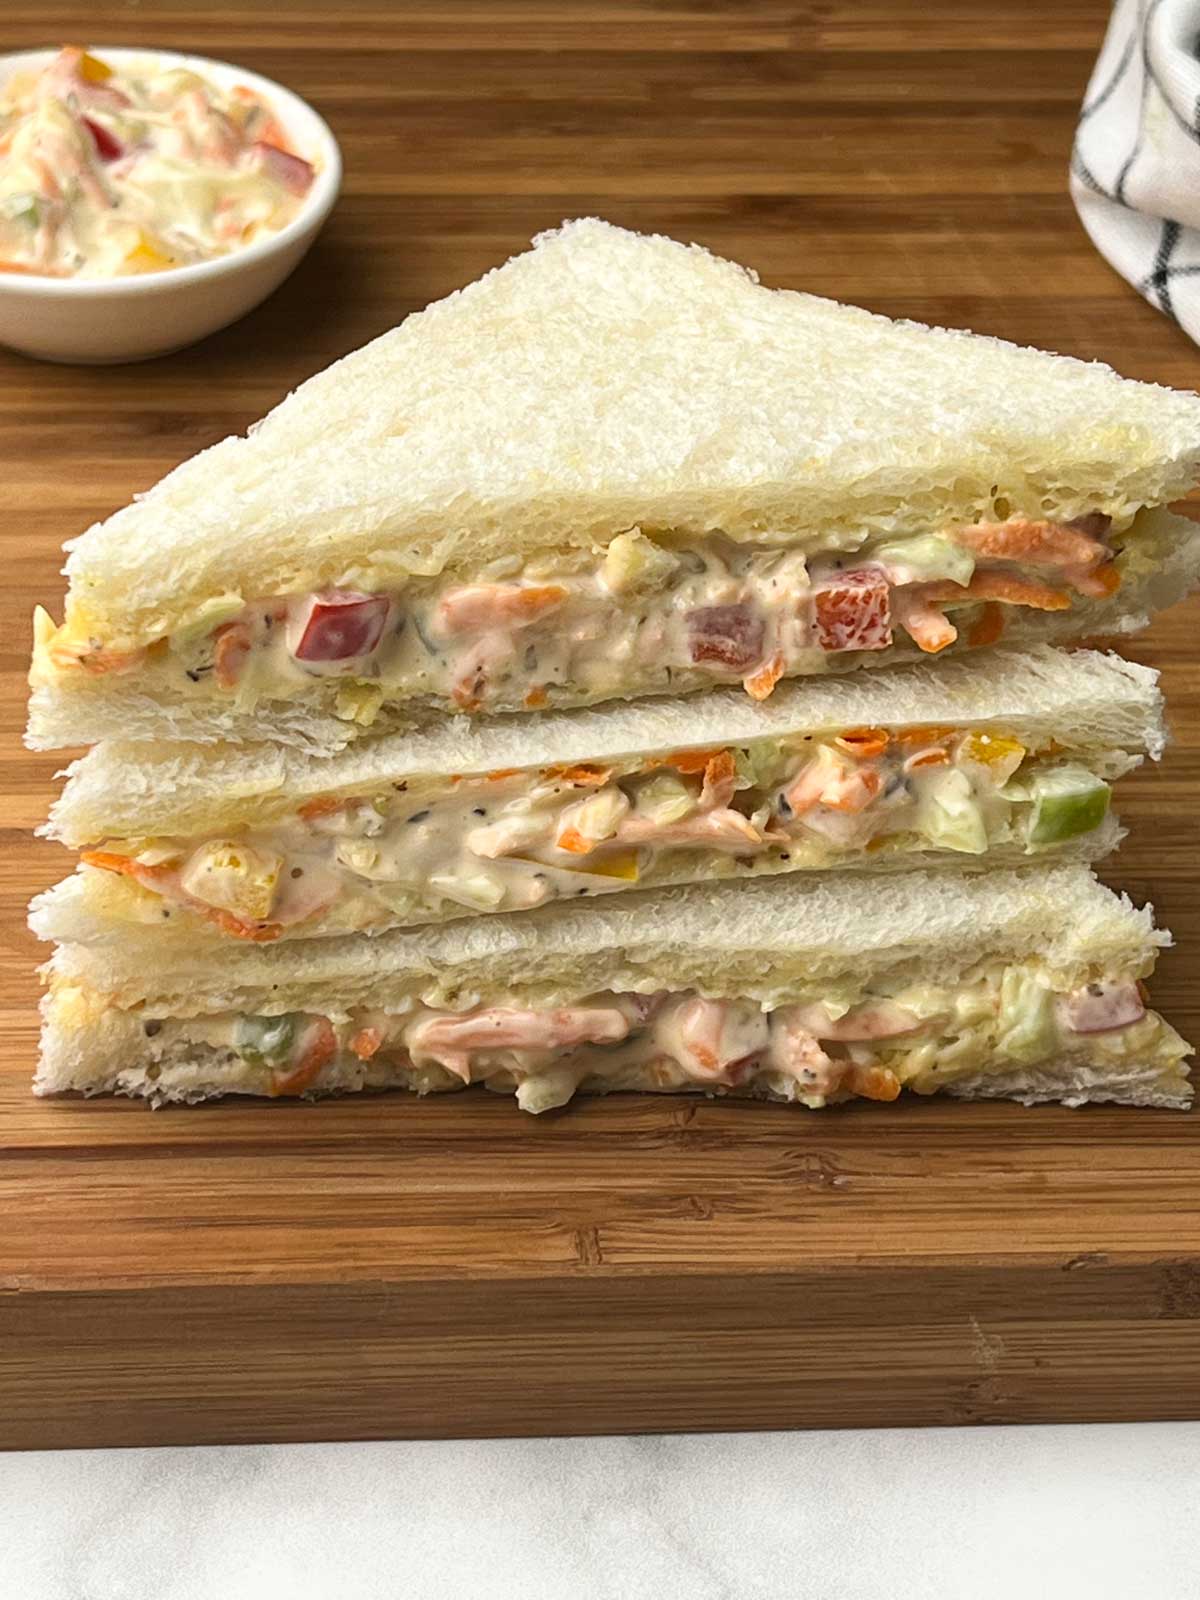 veg mayo sandwich stacked on a wooden board with vegetable-mayonnaise mixture on the side